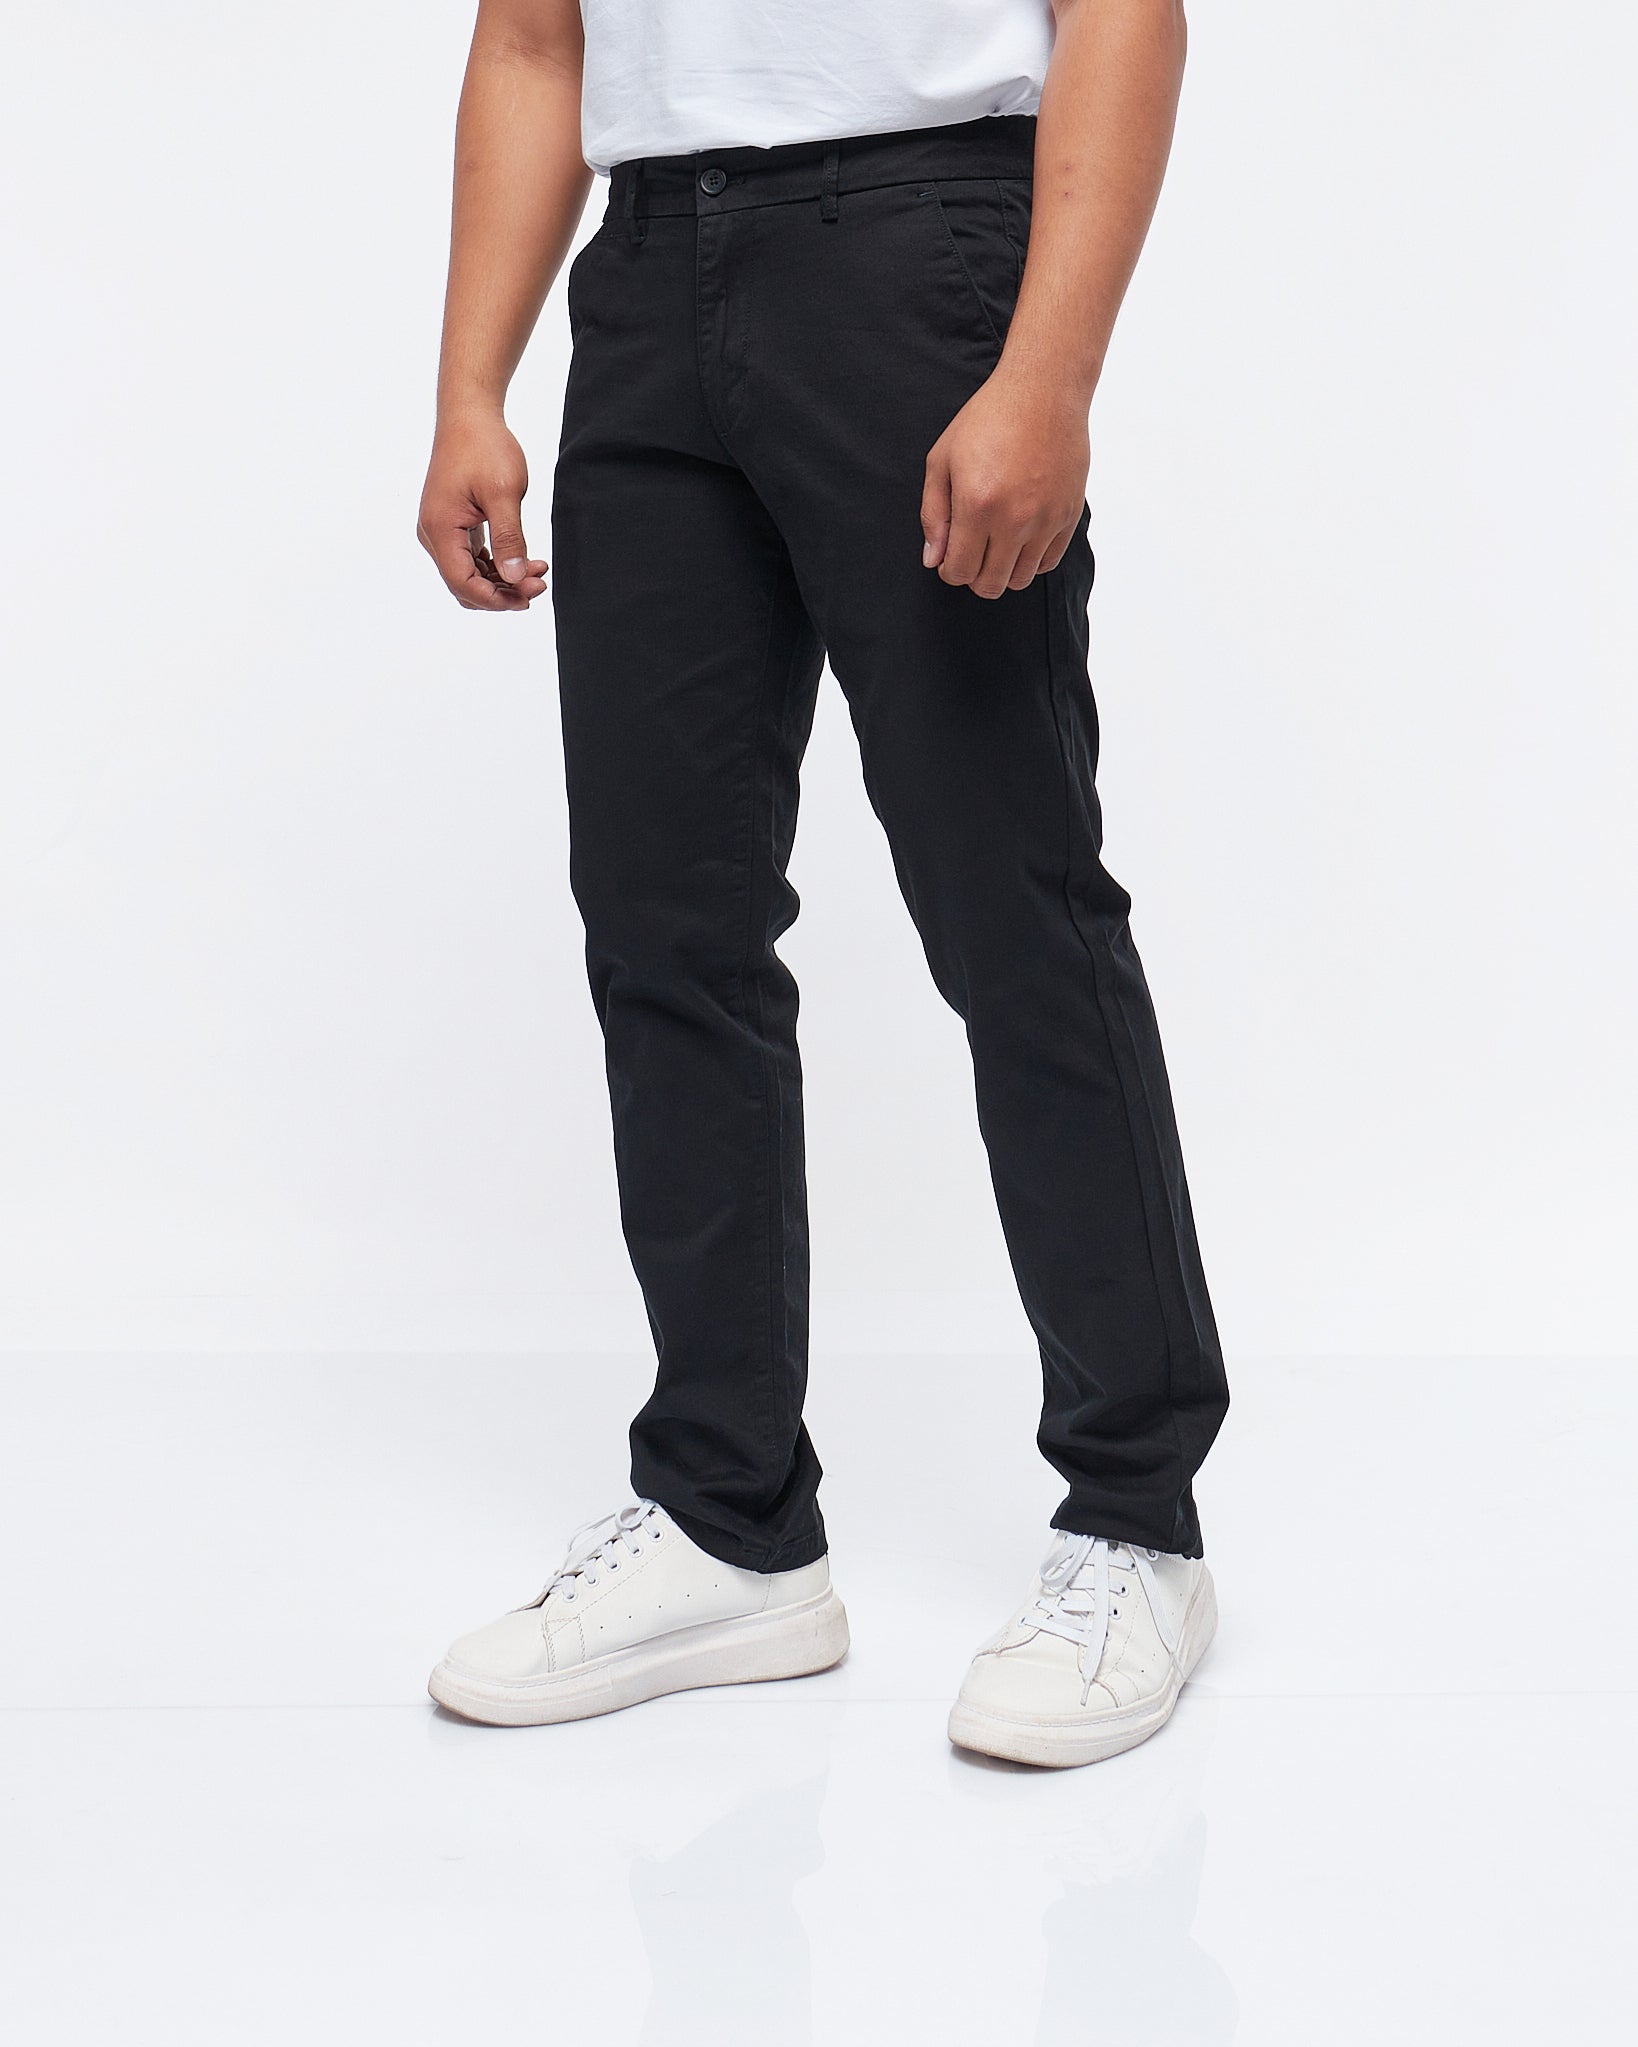 Athletic Ultimate Tech Built-In Flex Chino Pants for Men | Old Navy